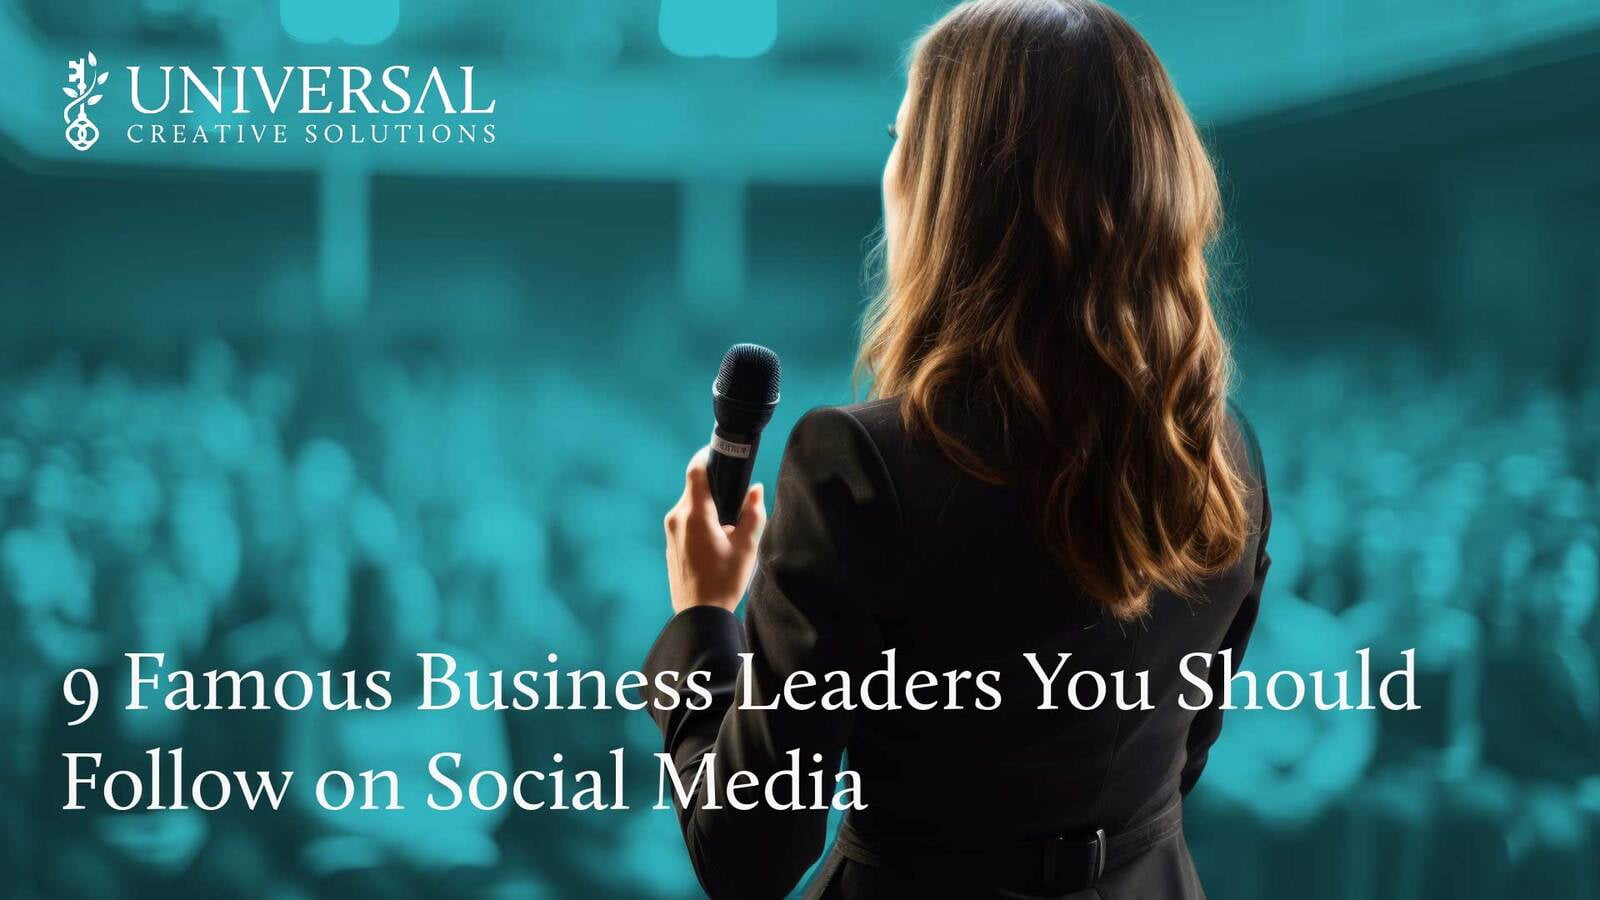 9 Famous Business Leaders You Should Follow on Social Media